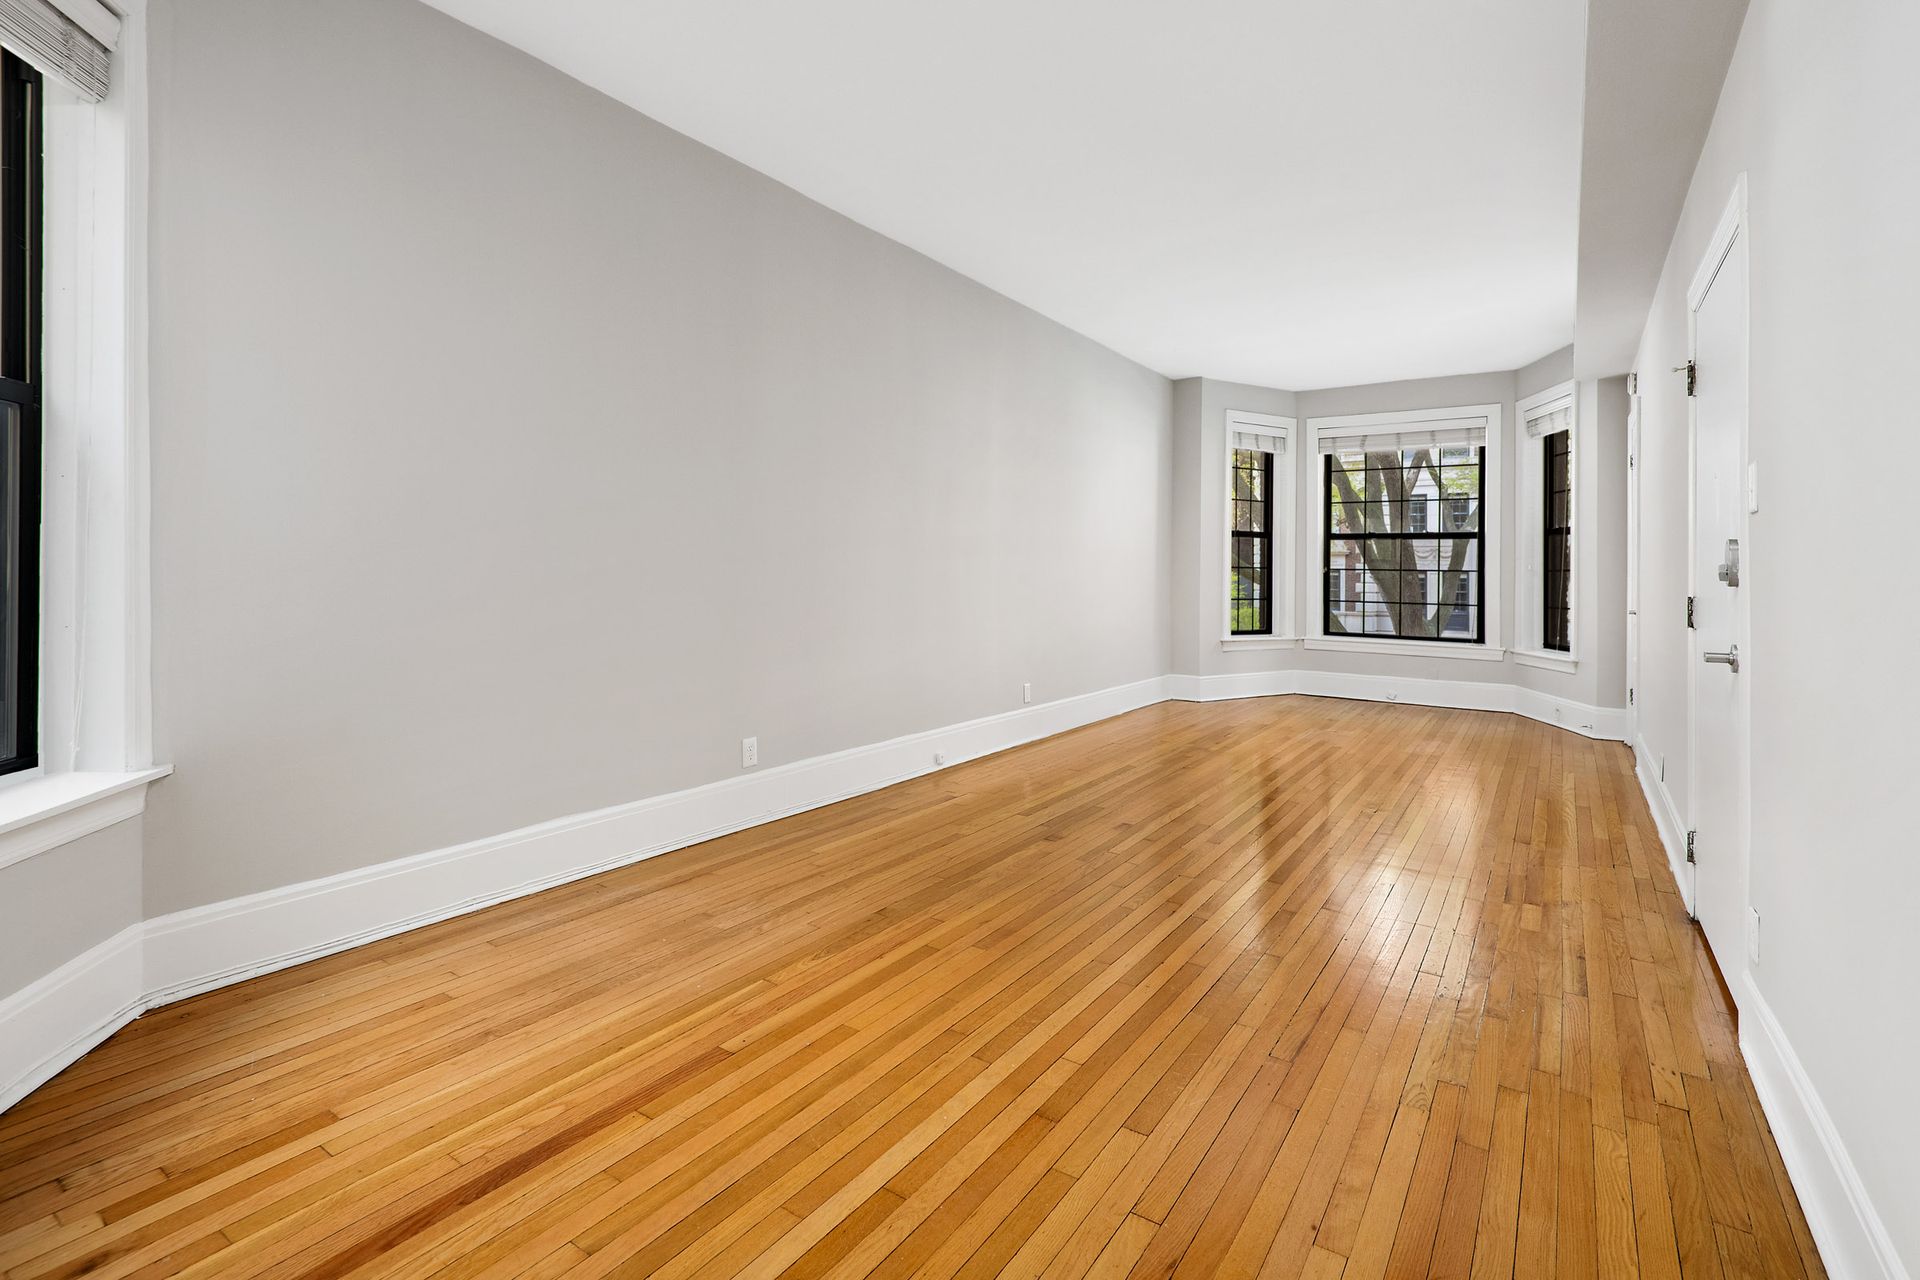 An empty living room with hardwood floors and white walls at 429 W Melrose Street.